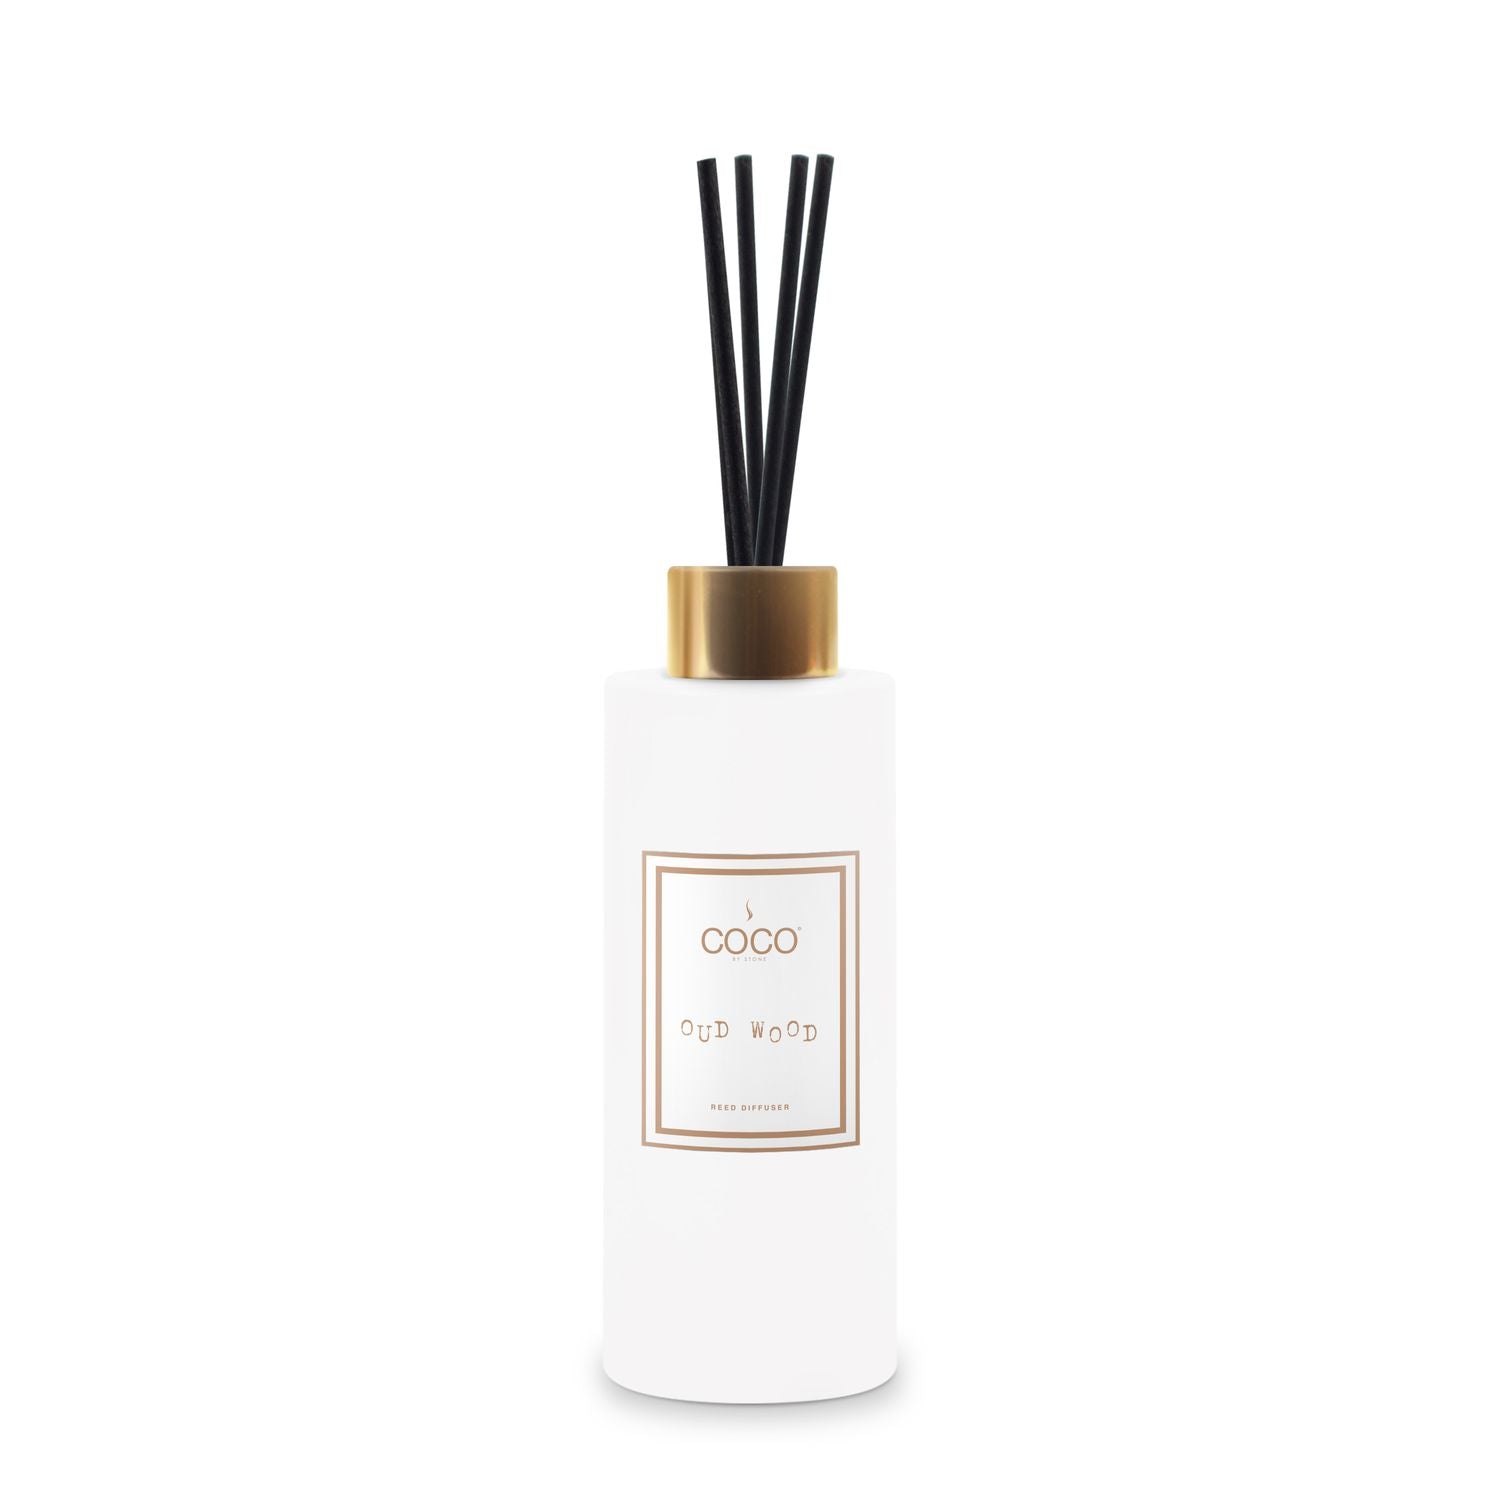 COCO by Stone Reed Diffusers Smells Like Oud Wood